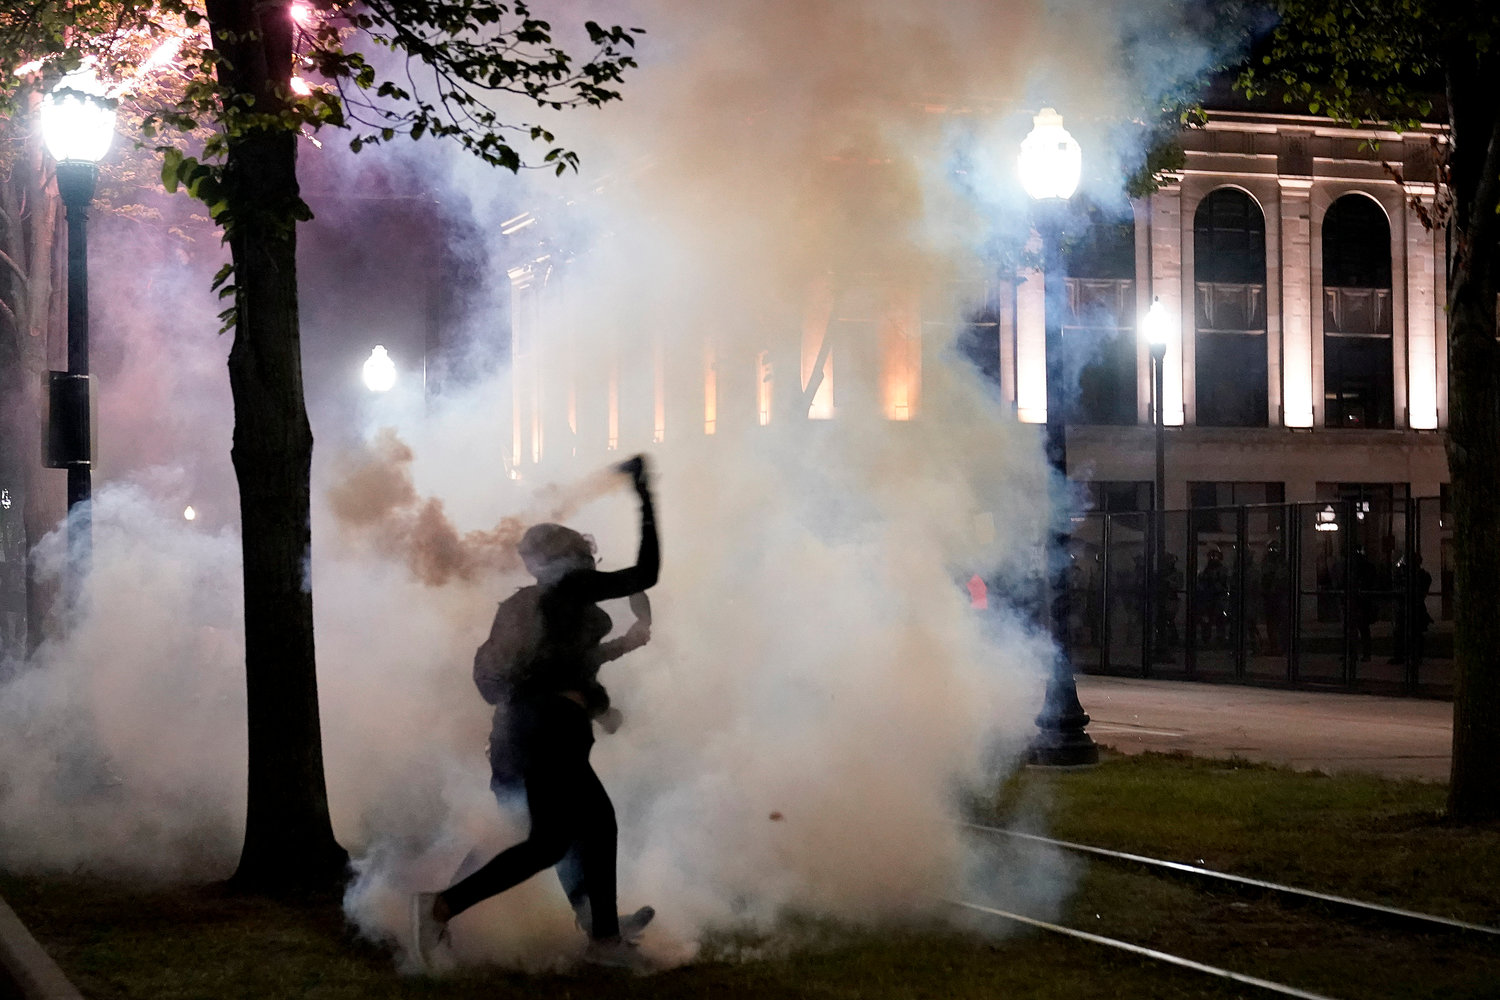 MORE VIOLENCE — A protester throws back a can of smoke toward law enforcement during clashes outside the Kenosha County Courthouse late Tuesday in Kenosha, Wis.